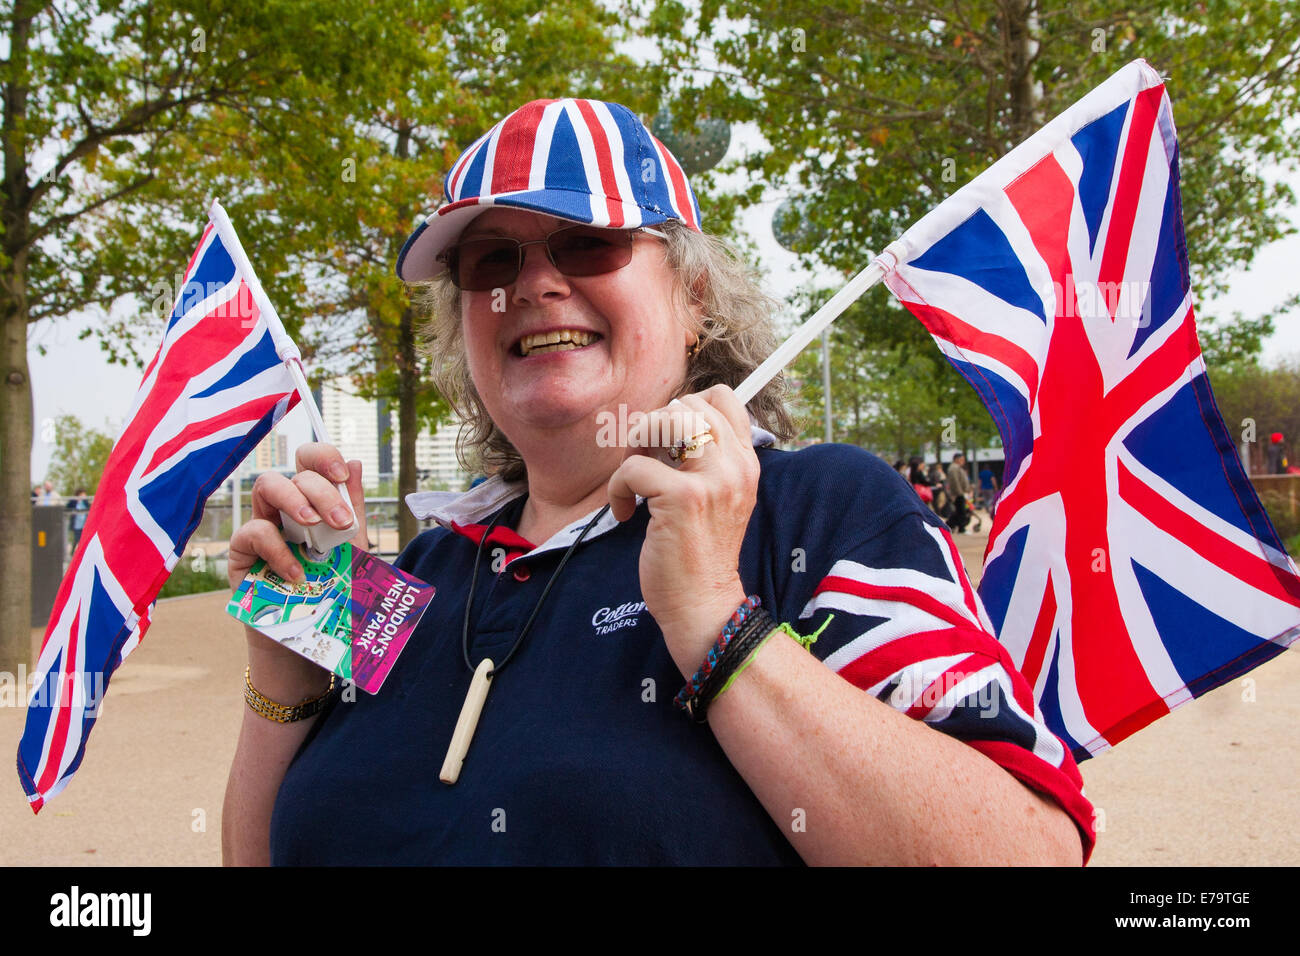 Queen Elizabeth Olympic Park, London, UK. 10th Sep, 2014. Patriotic Tig Hyett heads for the opening ceremony for the Invictus Games, where over 400 competitors from 13 nations will take part in an international sporting event for wounded, injured and sick Servicemen and women. Credit:  Paul Davey/Alamy Live News Stock Photo